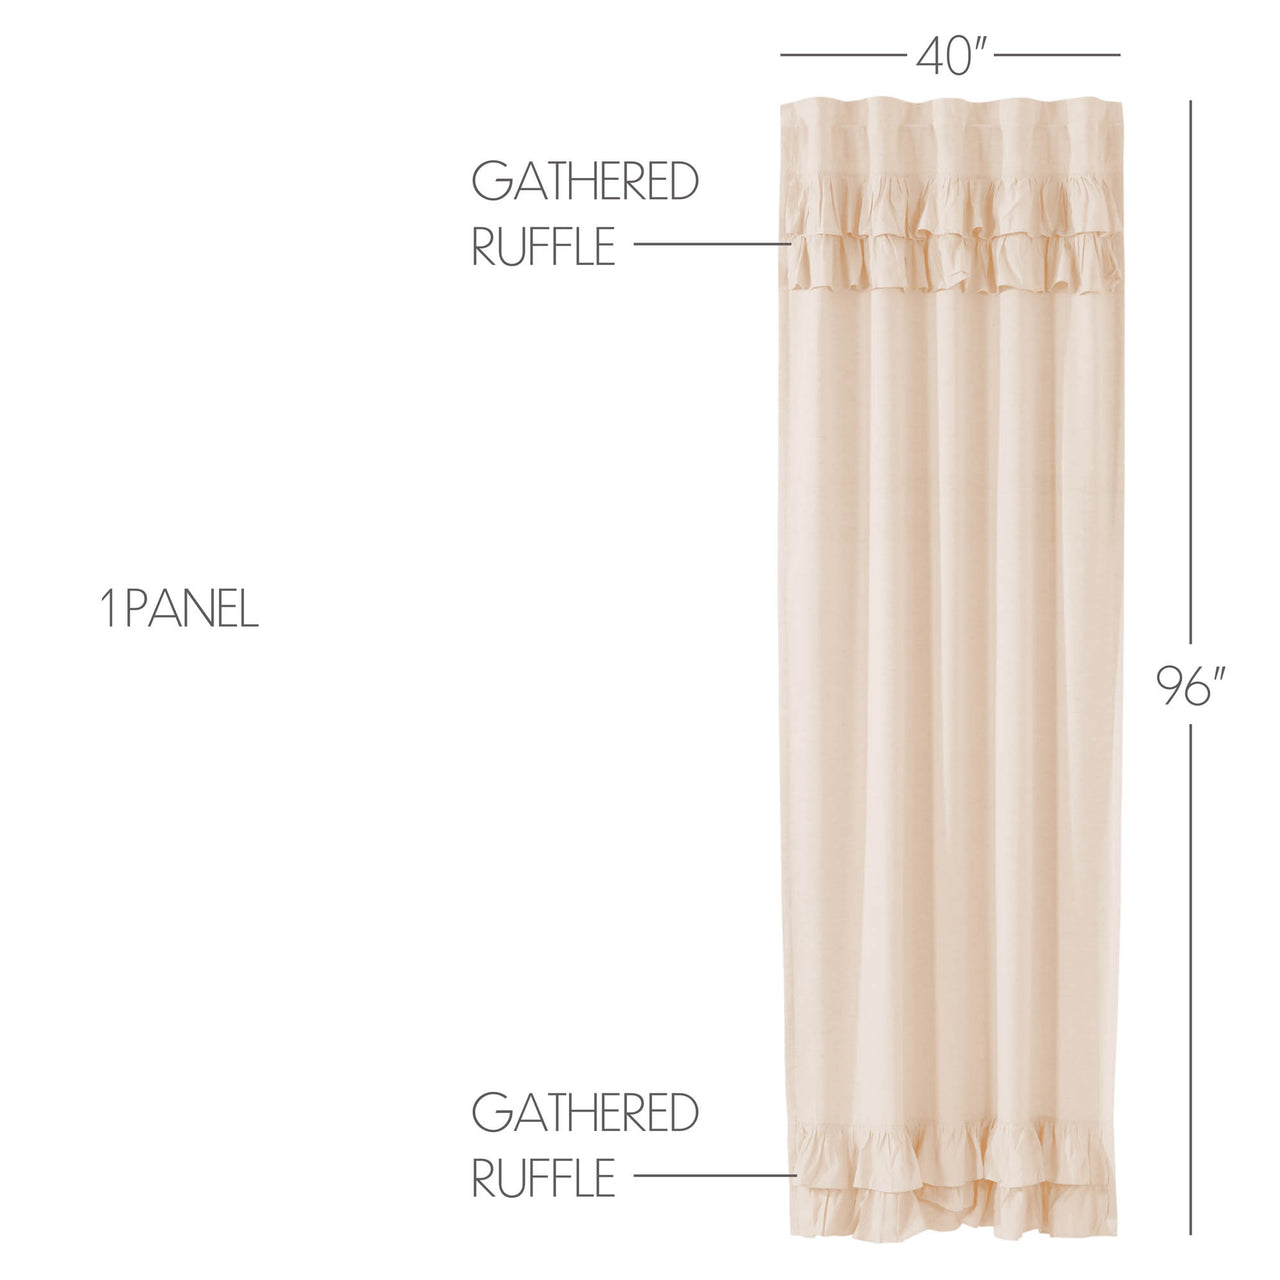 Simple Life Flax Natural Ruffled Panel Curtain 96"x40" VHC Brands